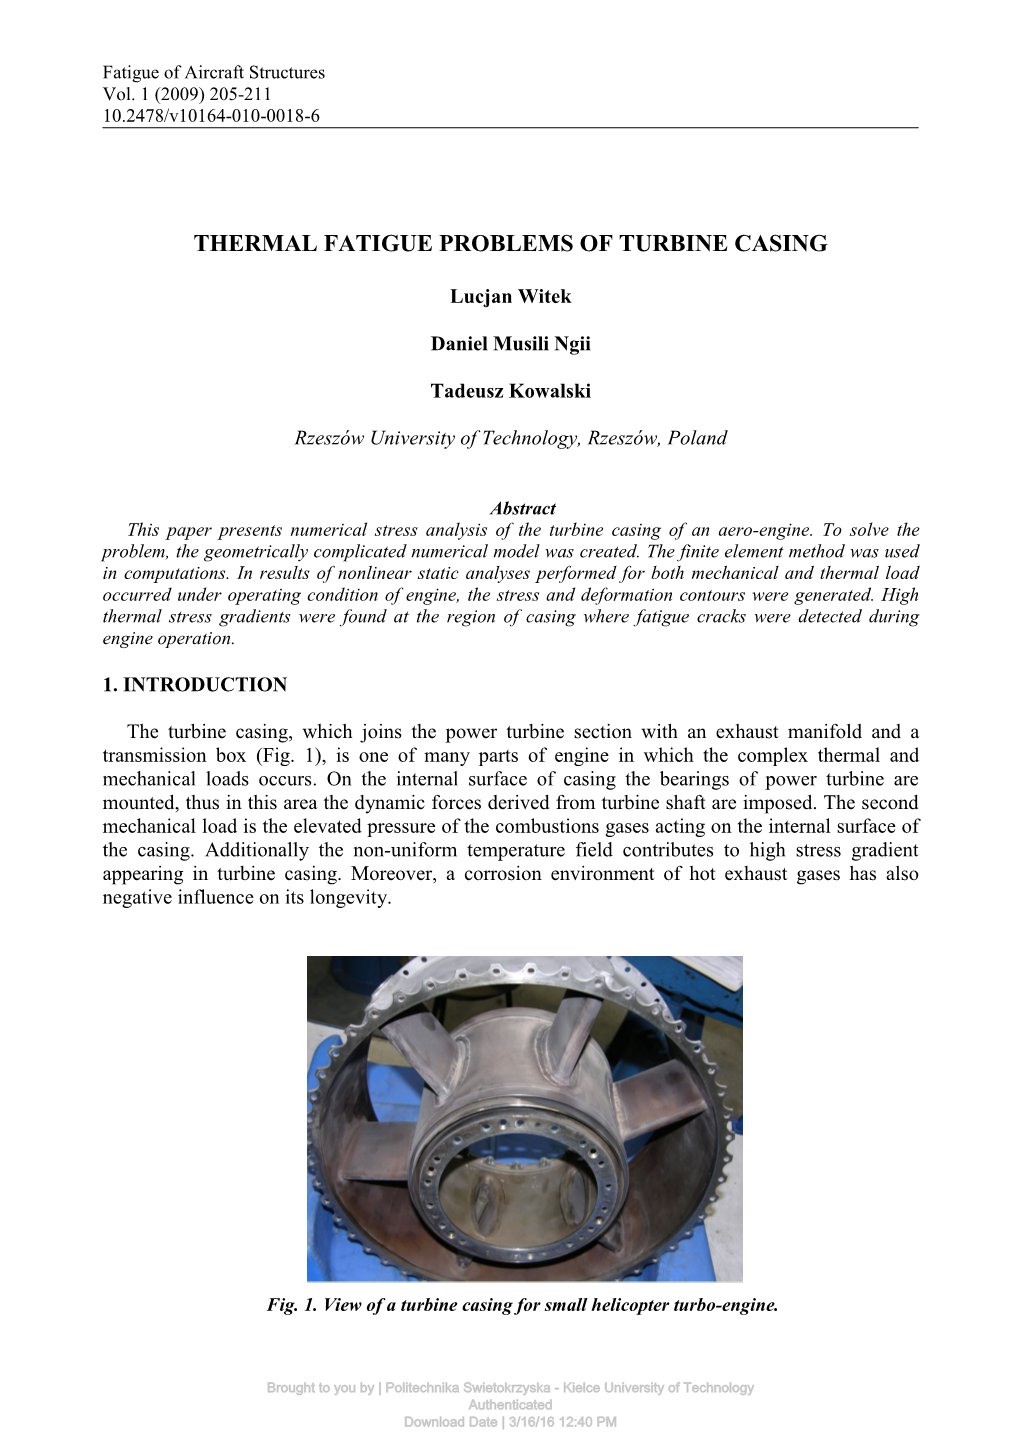 Thermal Fatigue Problems of Turbine Casing